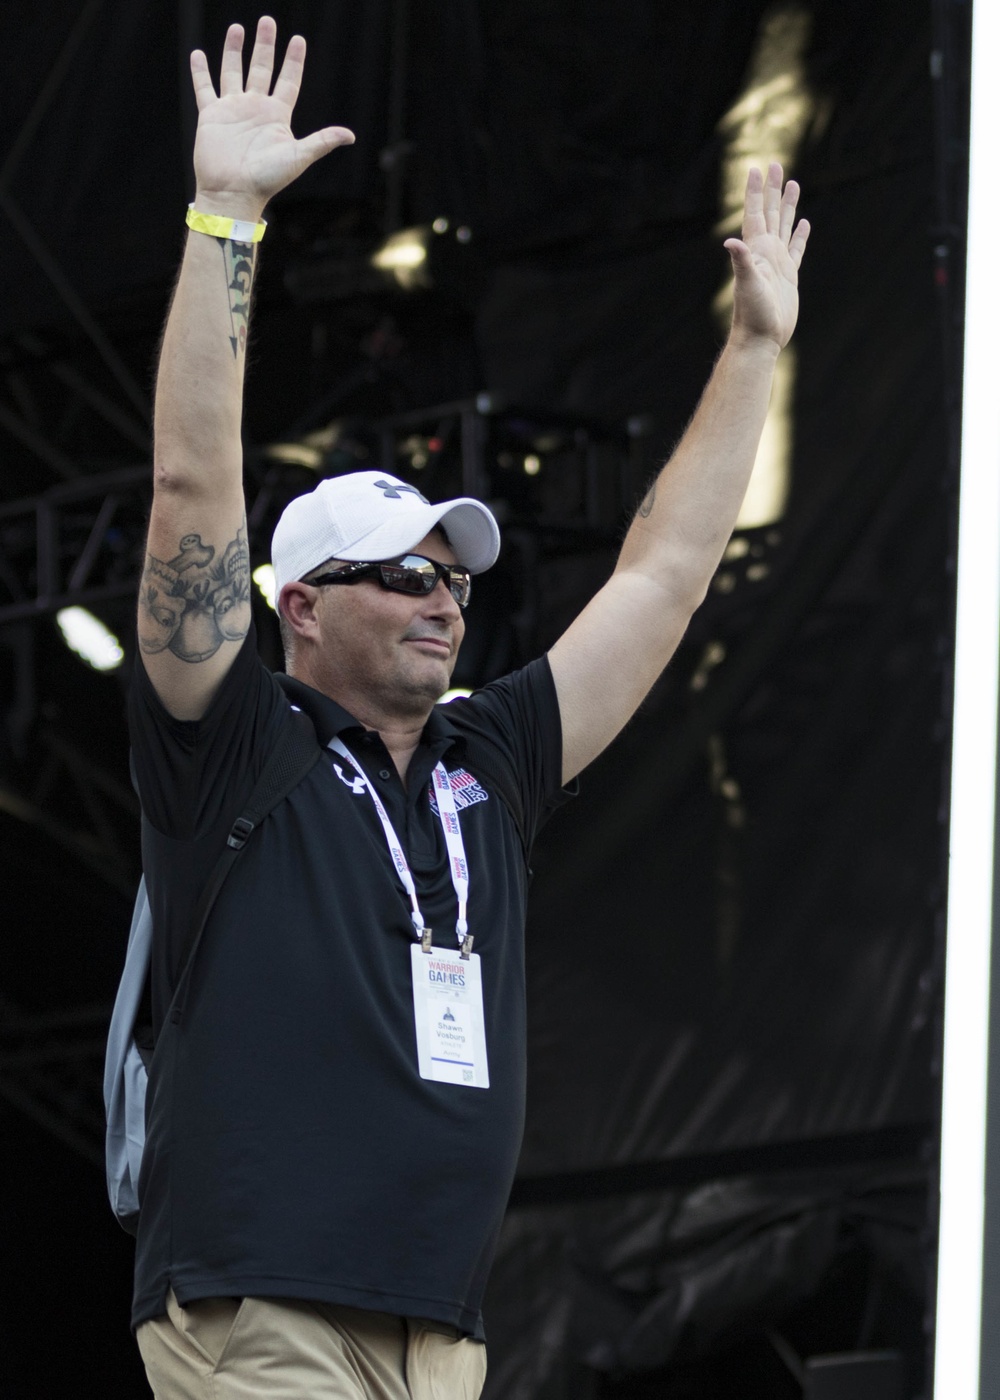 Master Sgt. Shawn Vosburg waves to the crowd